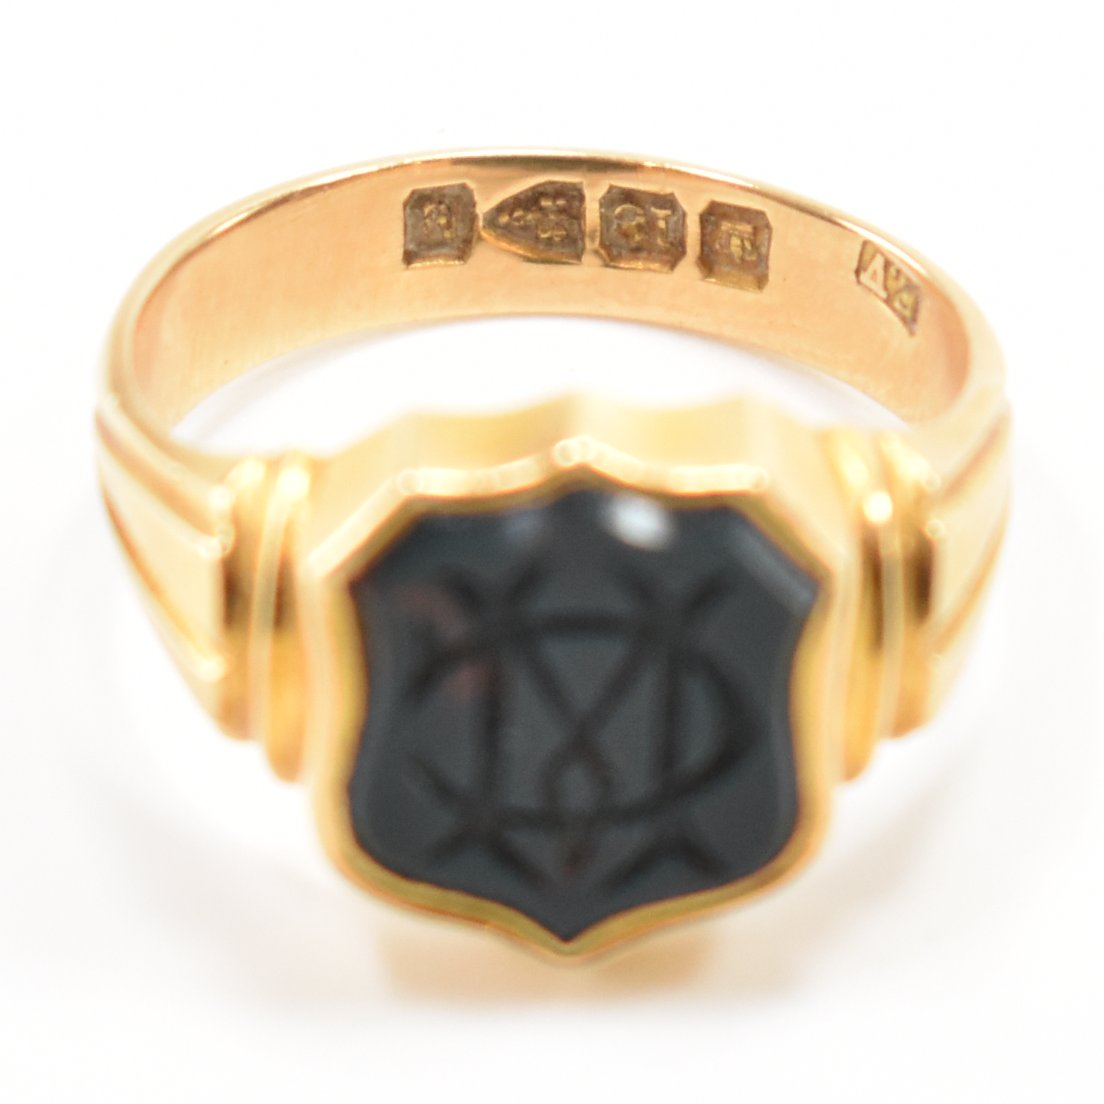 VICTORIAN 18CT GOLD & BLOOD STONE SIGNET RING - Image 7 of 9